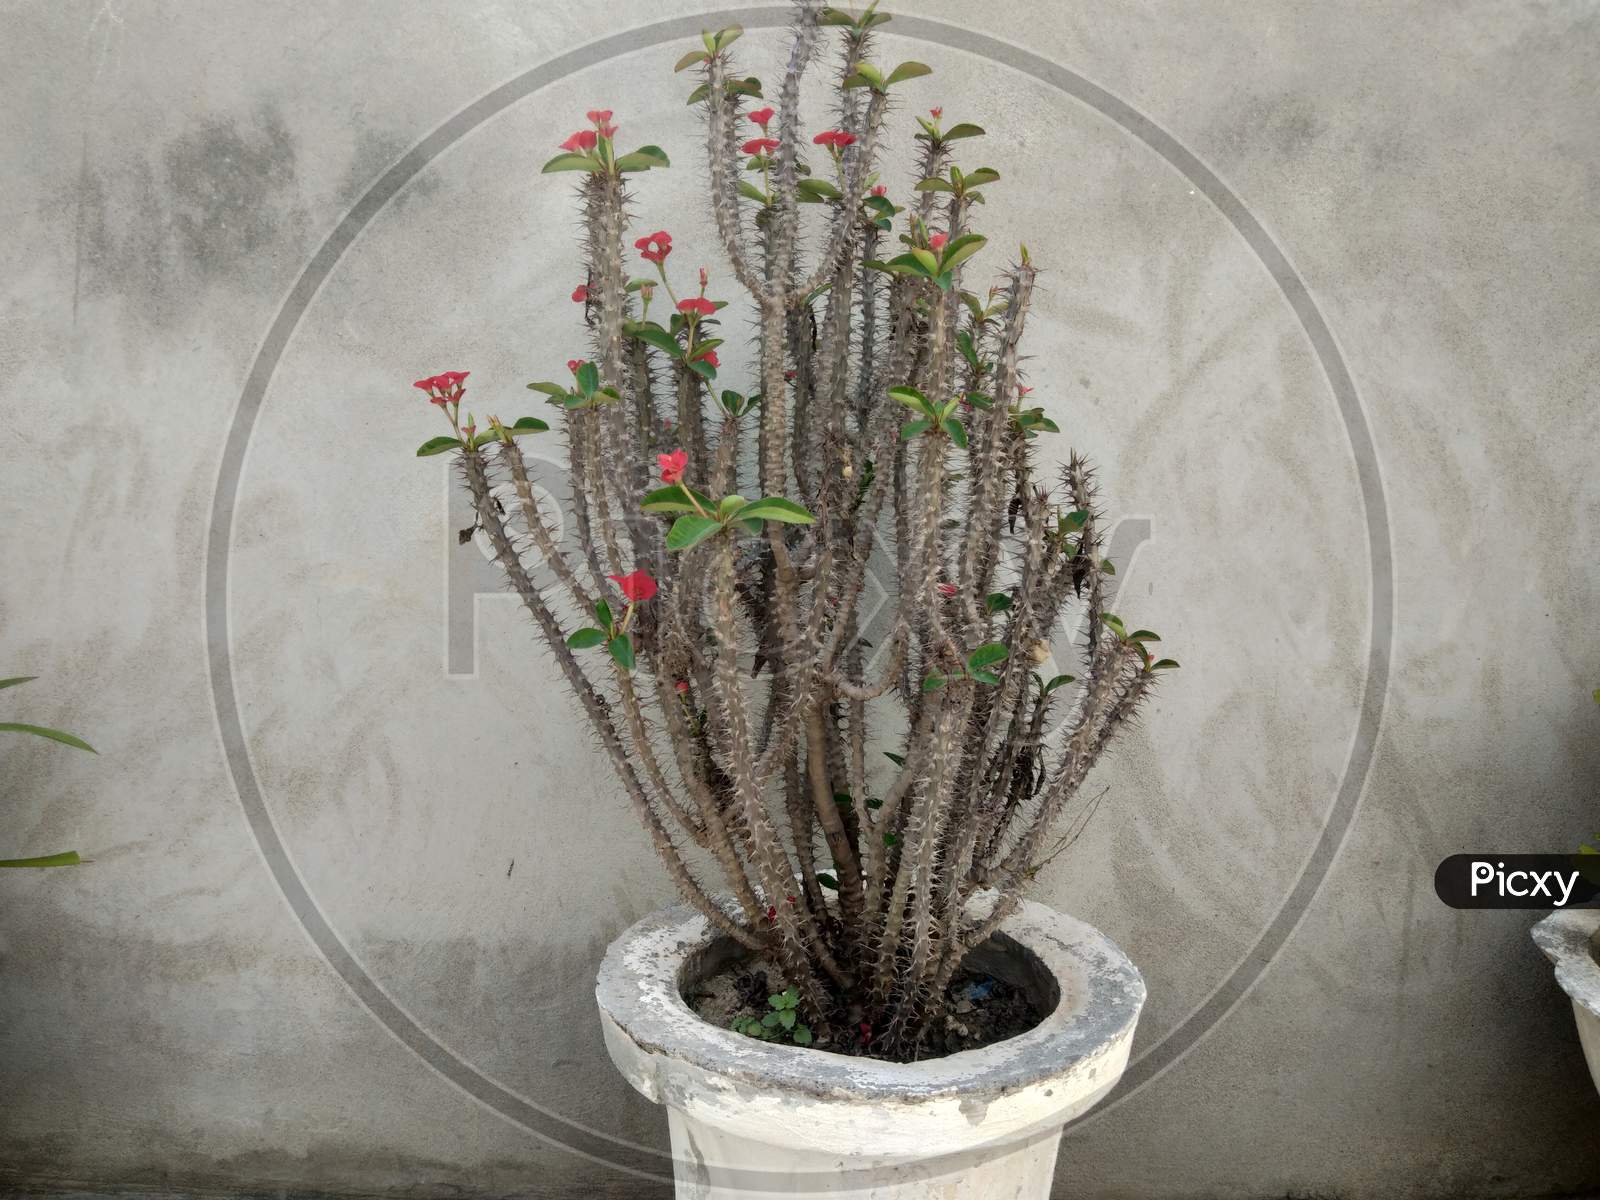 A thorny plant in a pot with red flowers on it, in spring season